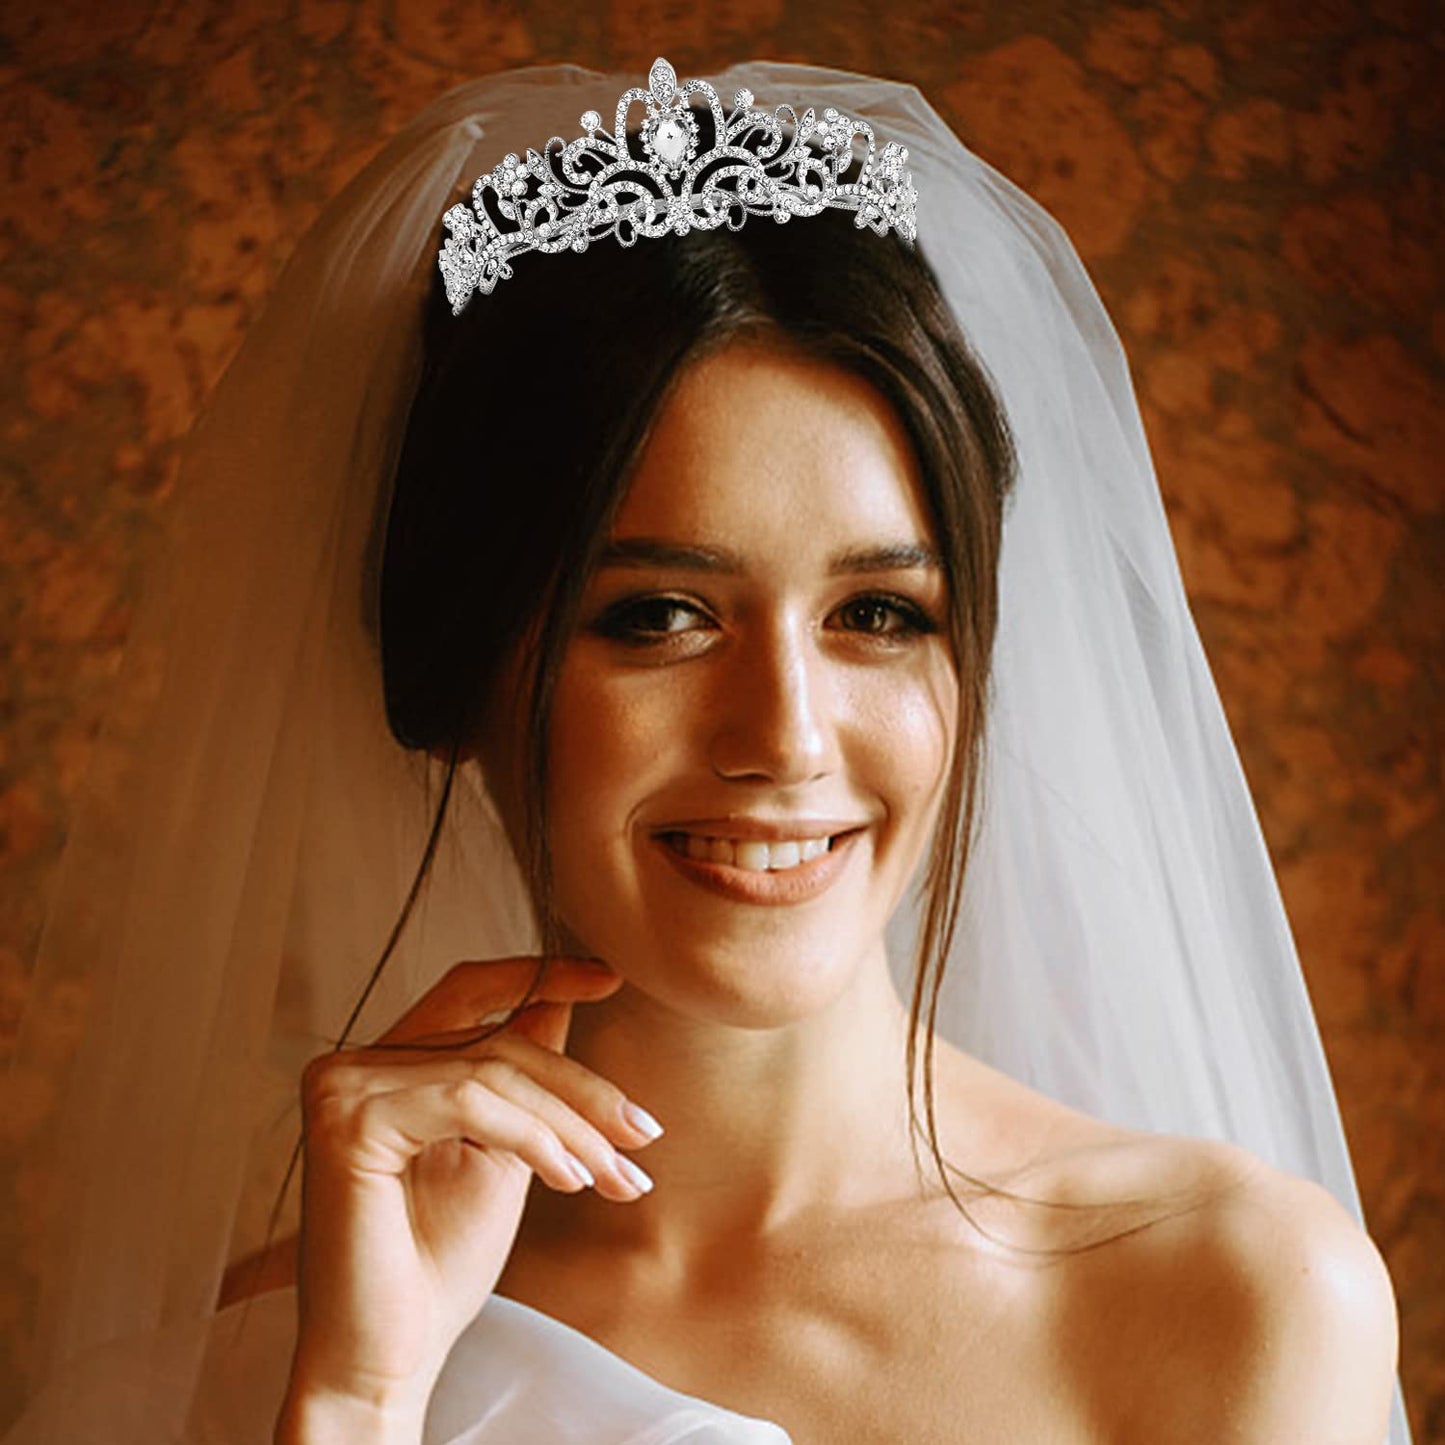 Didder Tiara and Lace Bridal Veil, Wedding Veils and Headpieces for Women, White Veils for Brides Tiaras and Crown for Women, Silver, 2 Piece Set